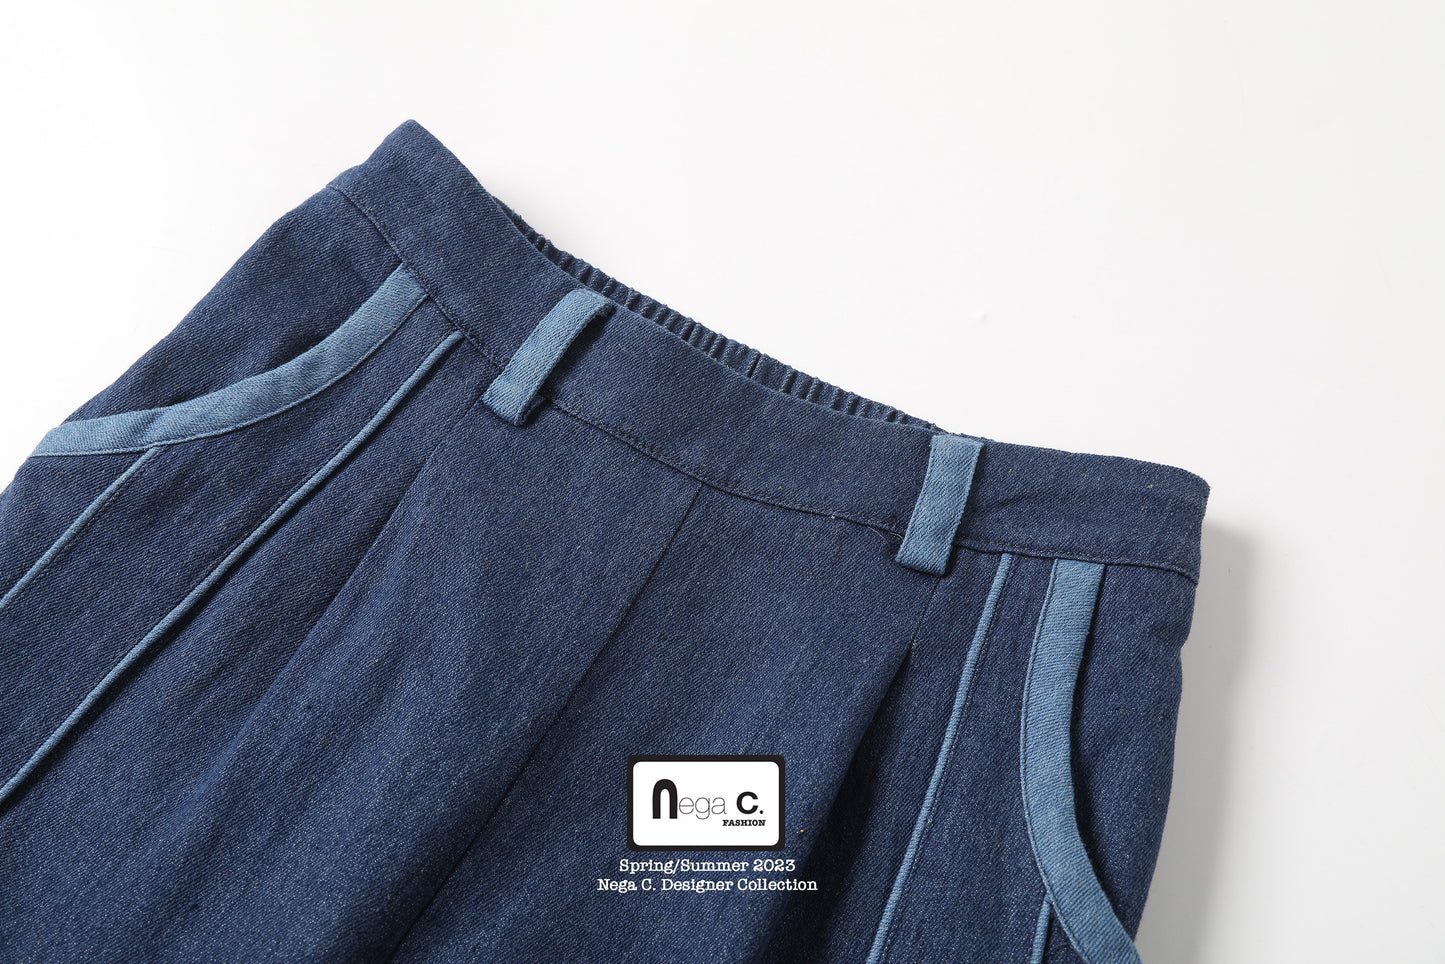 Nega C. color block wide-leg jeans with piping details |Navy|